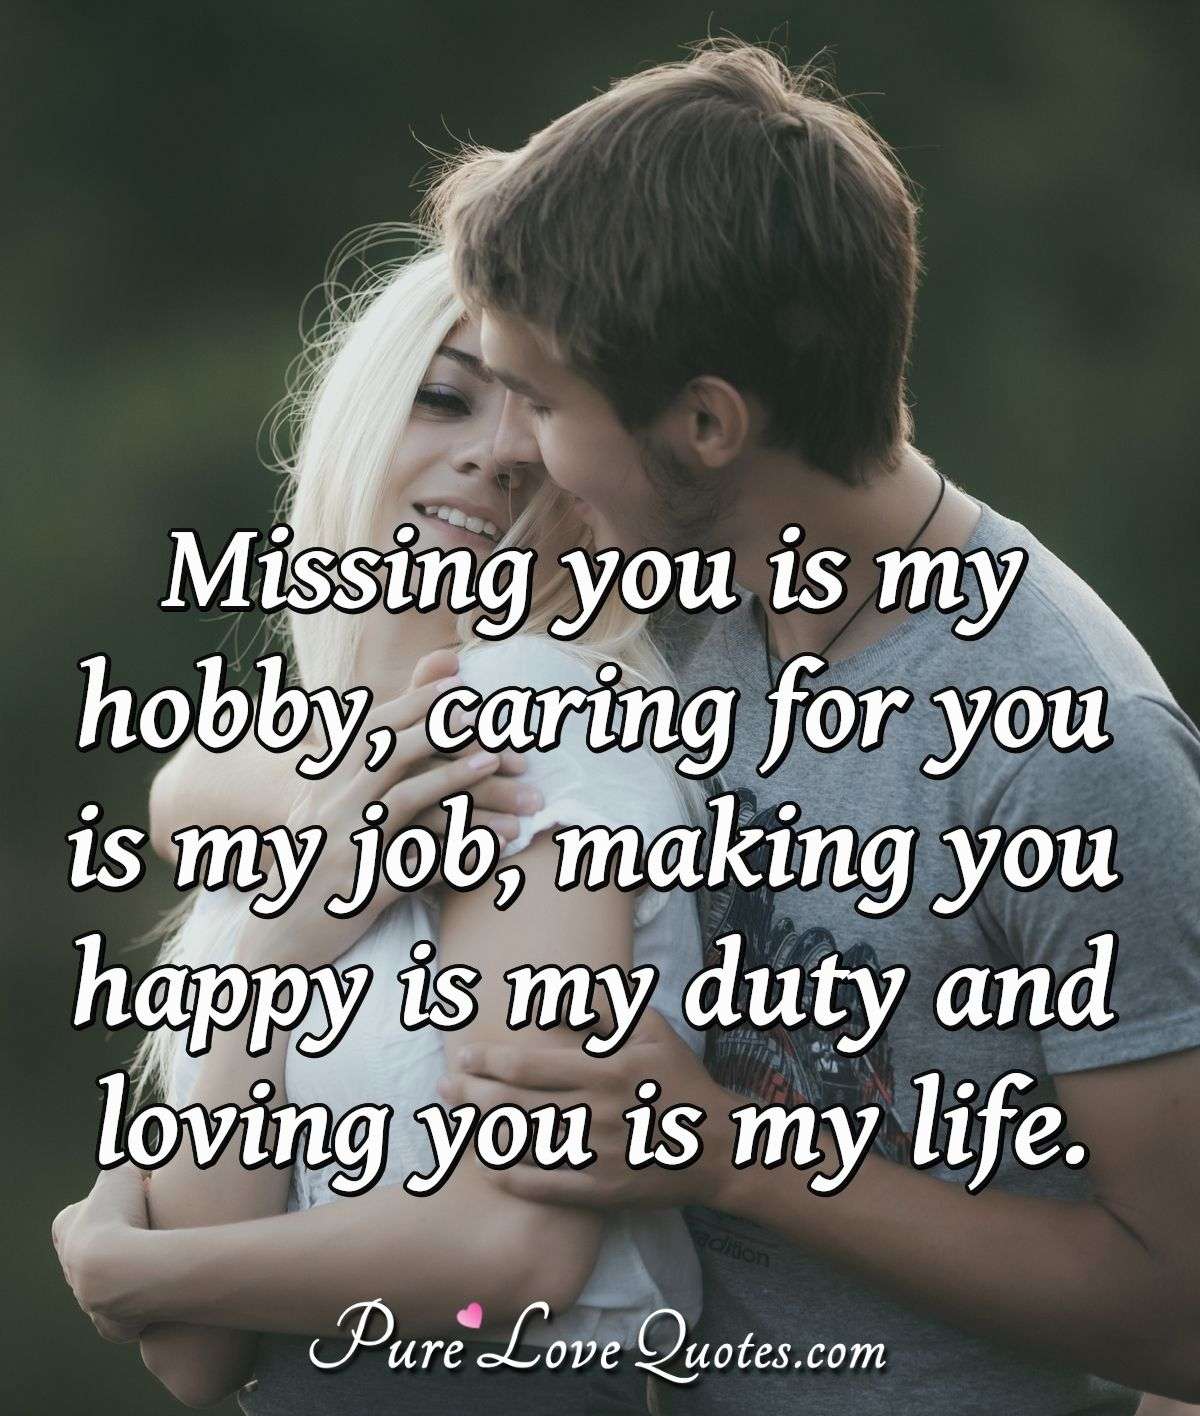 Missing you is my hobby, caring for you is my job, making you happy is my duty and loving you is my life. - Anonymous